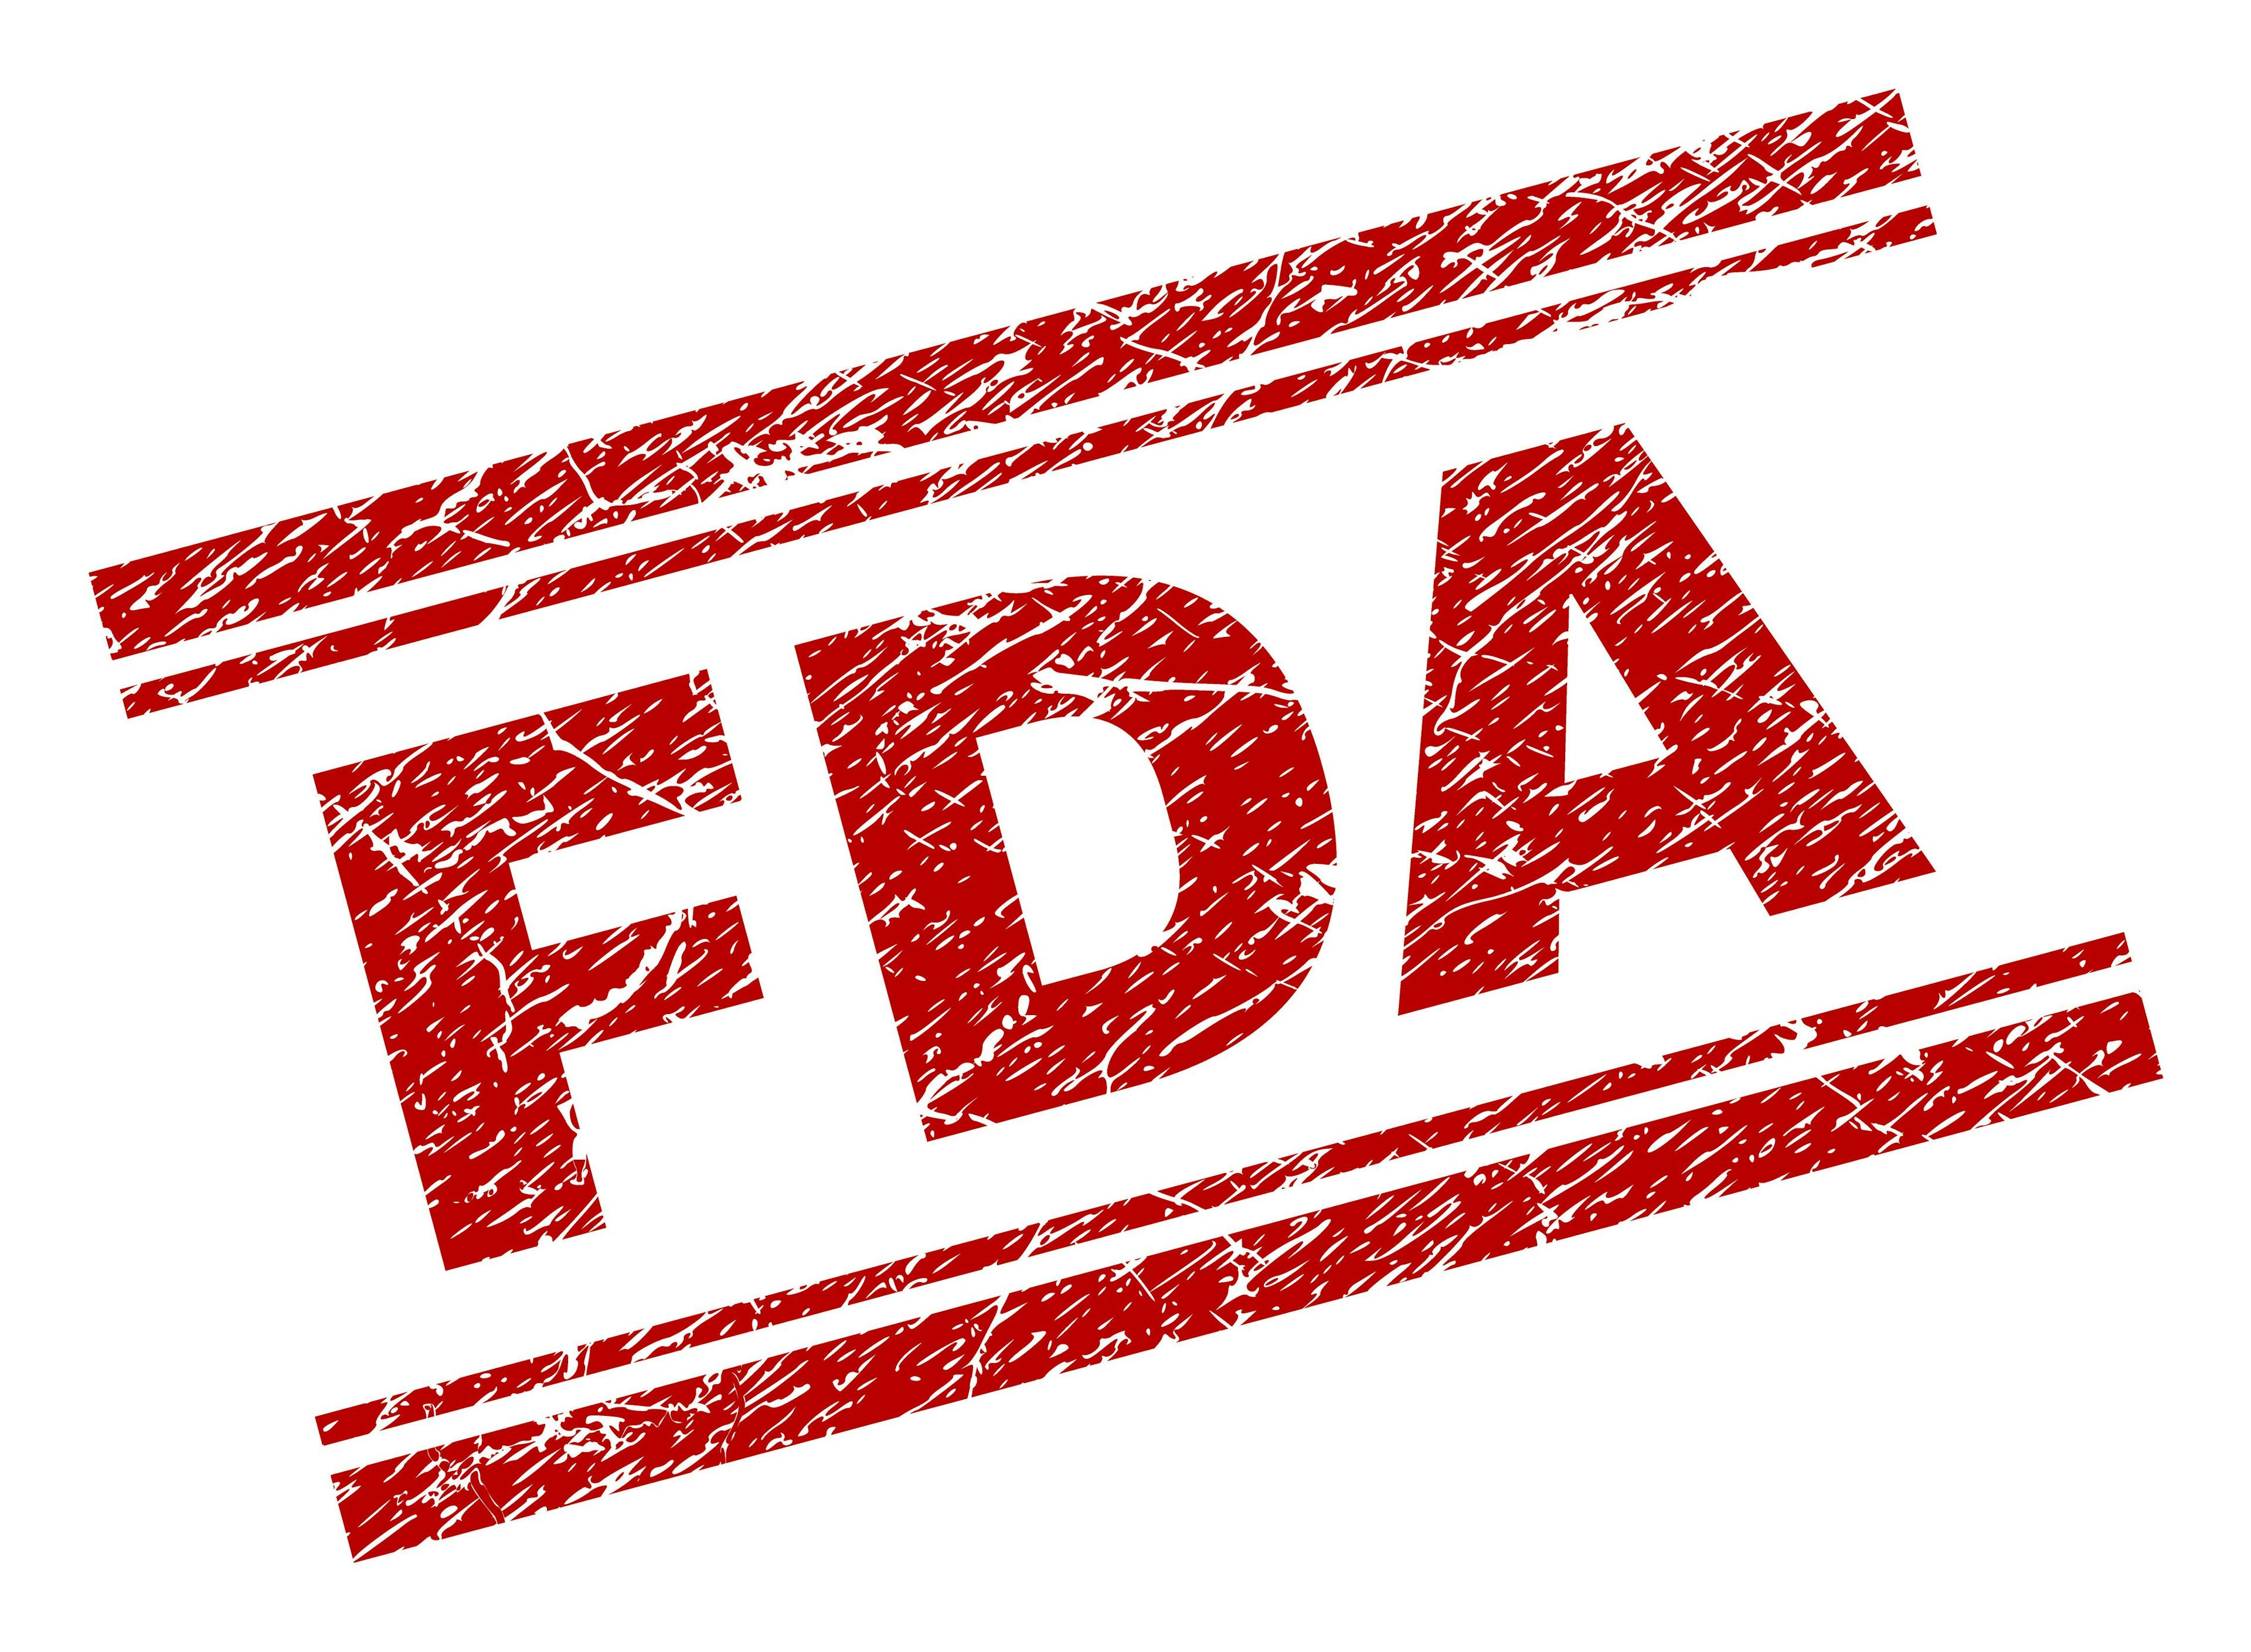 FDA Grants Priority Review to Spesolimab